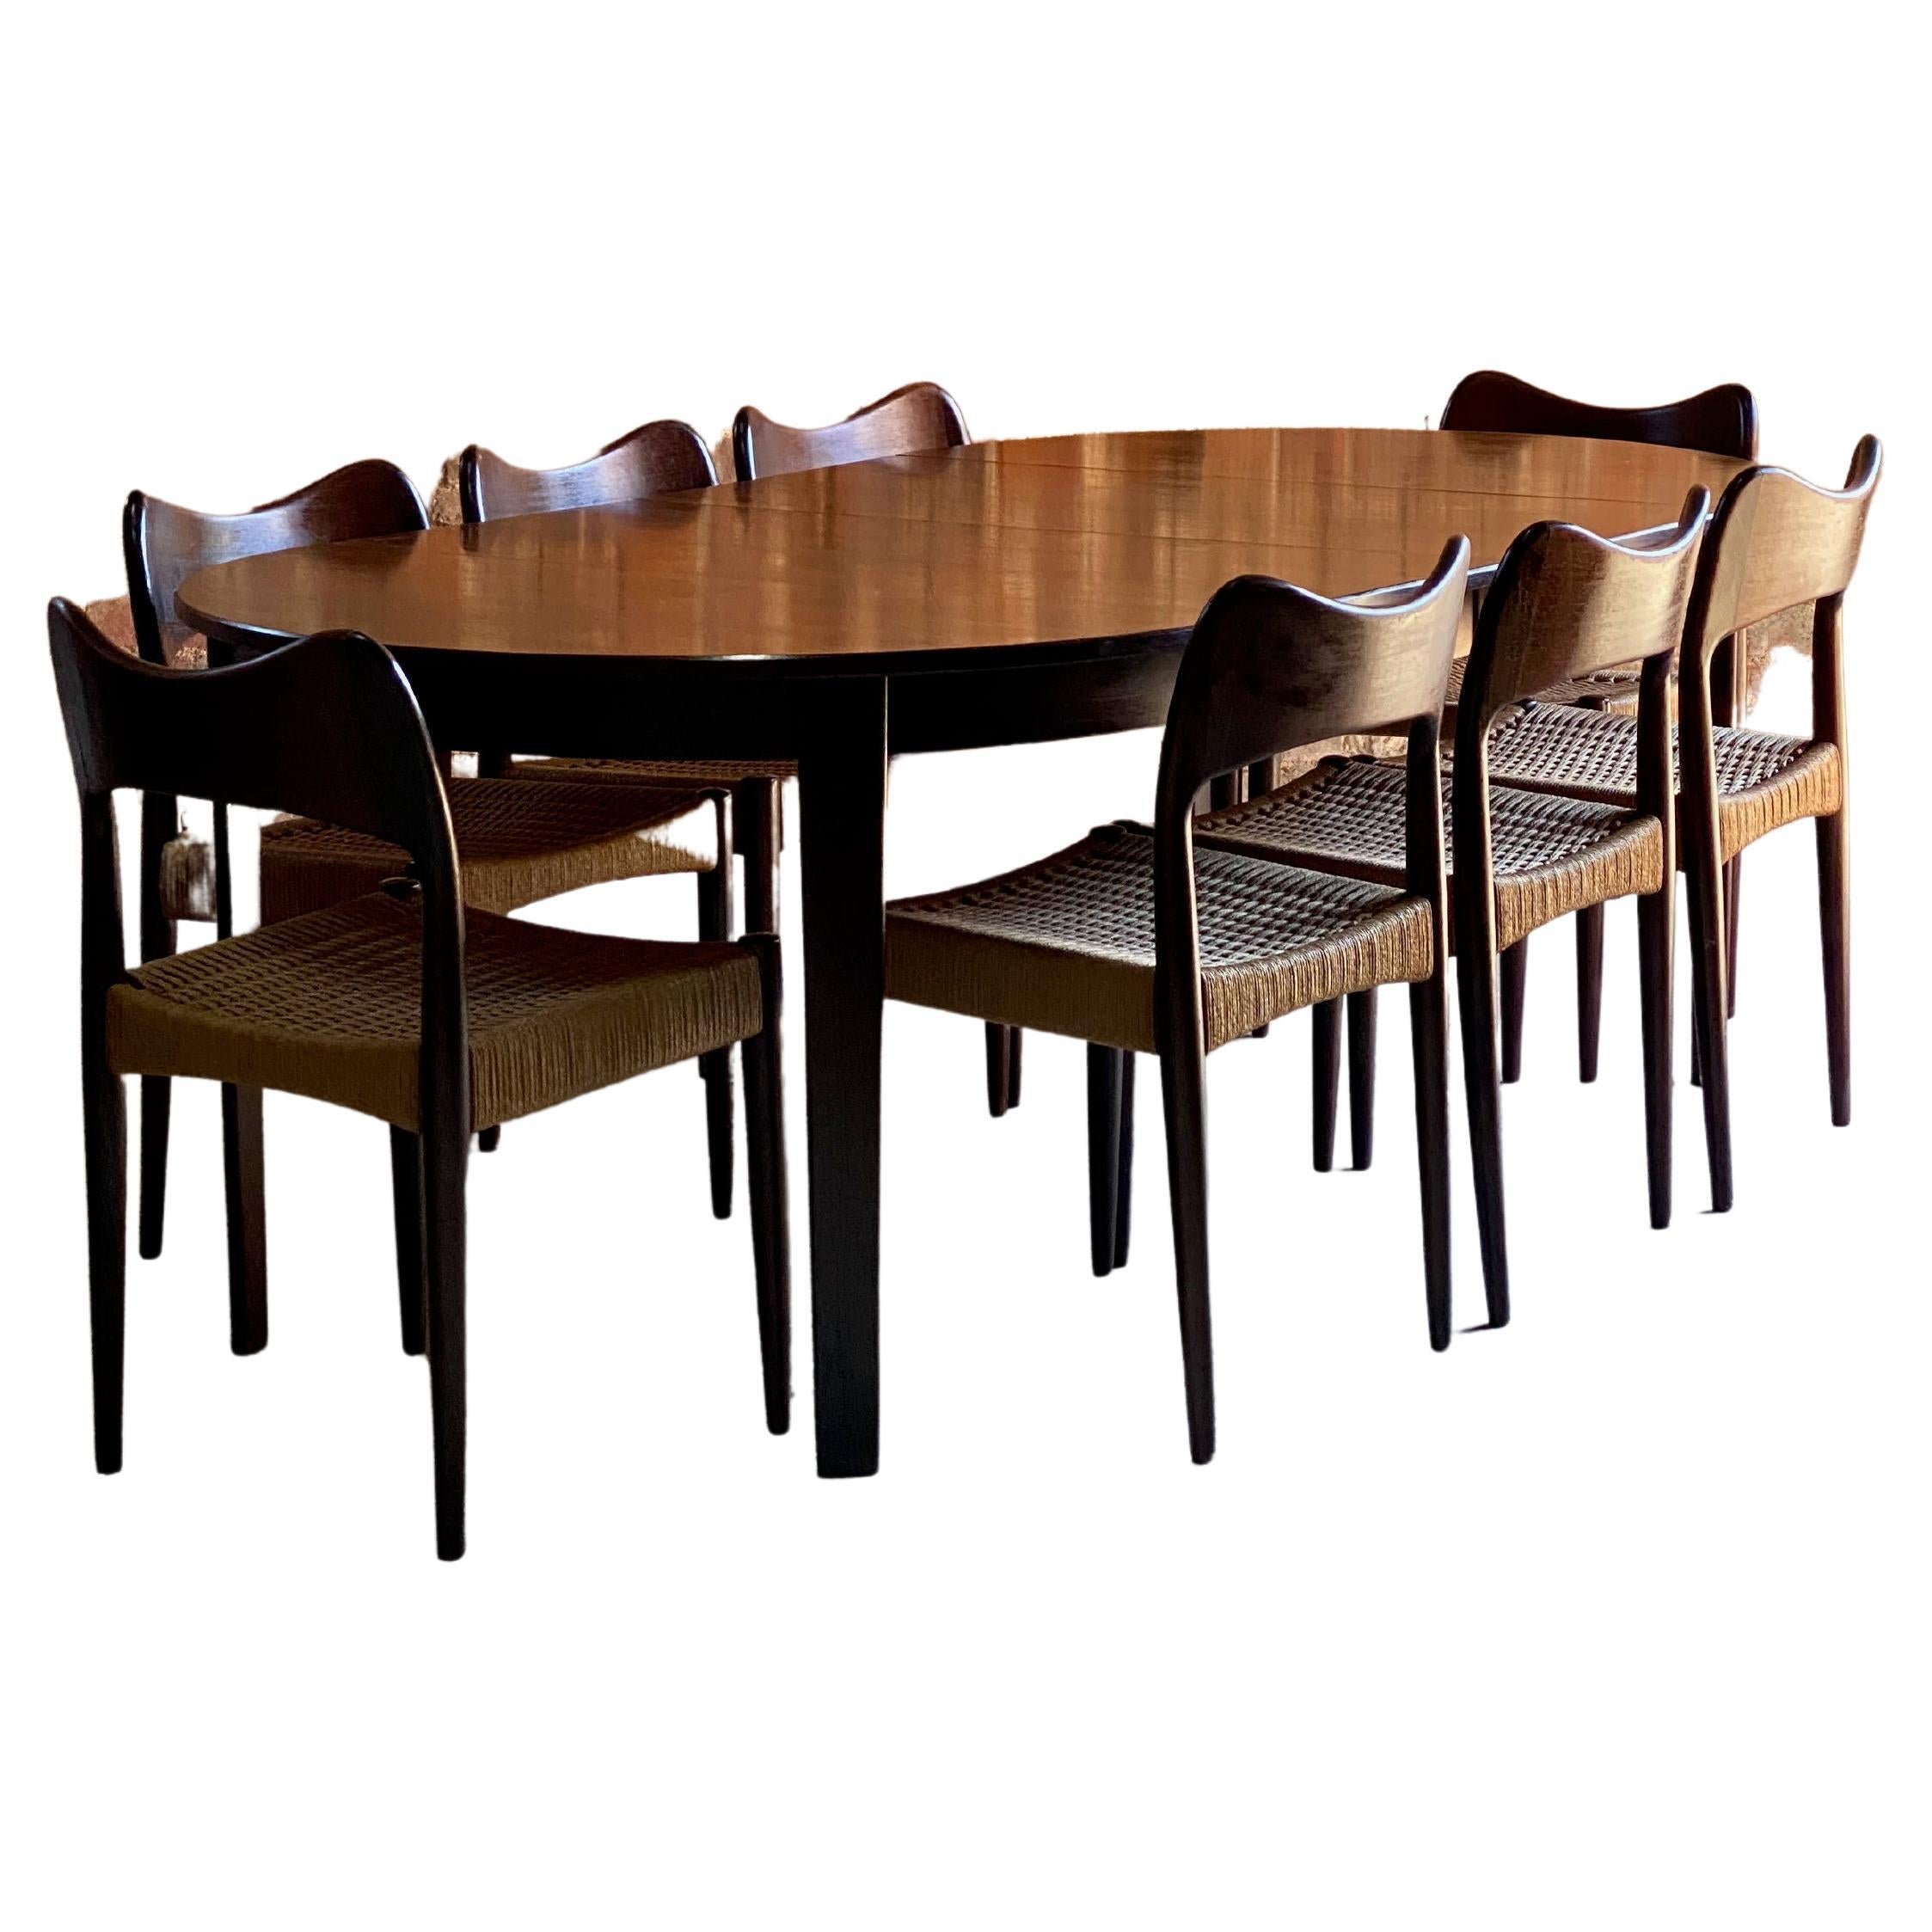 Arne Hovmand Olsen Round Rosewood Dining Table & 8 Dining Chairs by Mogens Kold 